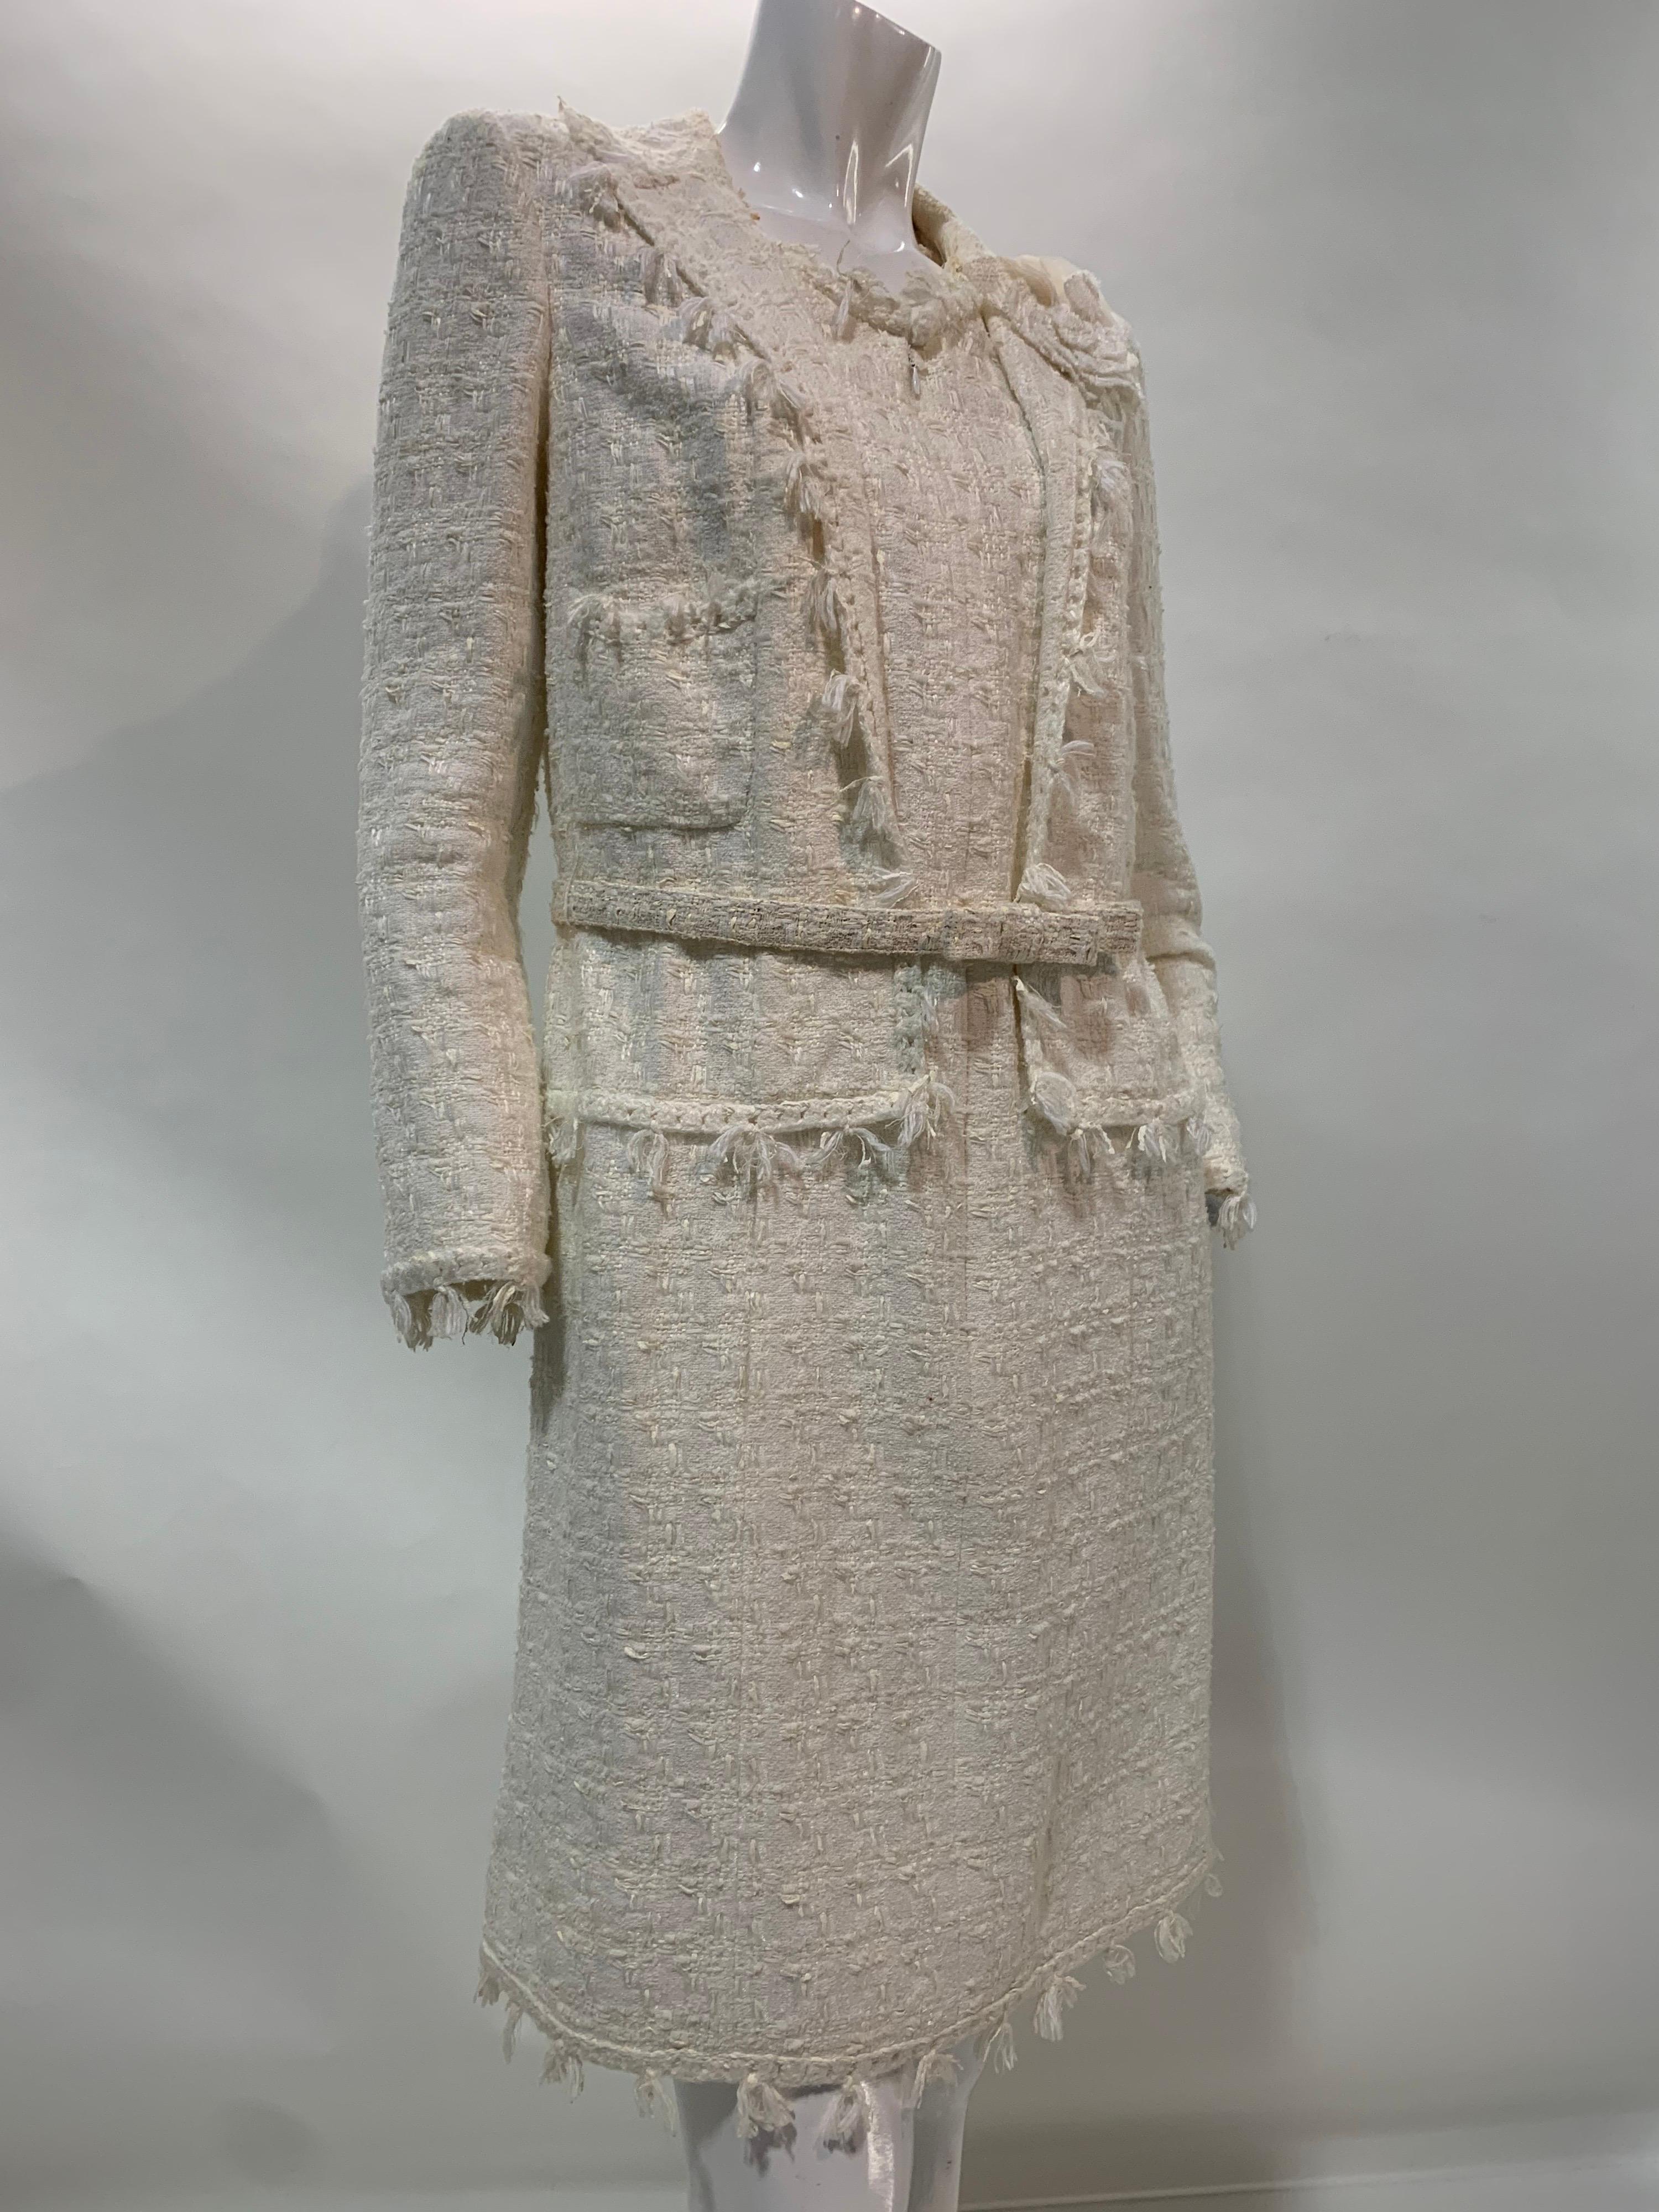 2005 Chanel ivory multi-fiber blend boucle weave coat dress in a tailored silhouette with front zippered closure and tuft fringe detail. Attached faux jacket with silver-tone camellia buttons. Matching original structured bow belt and detachable